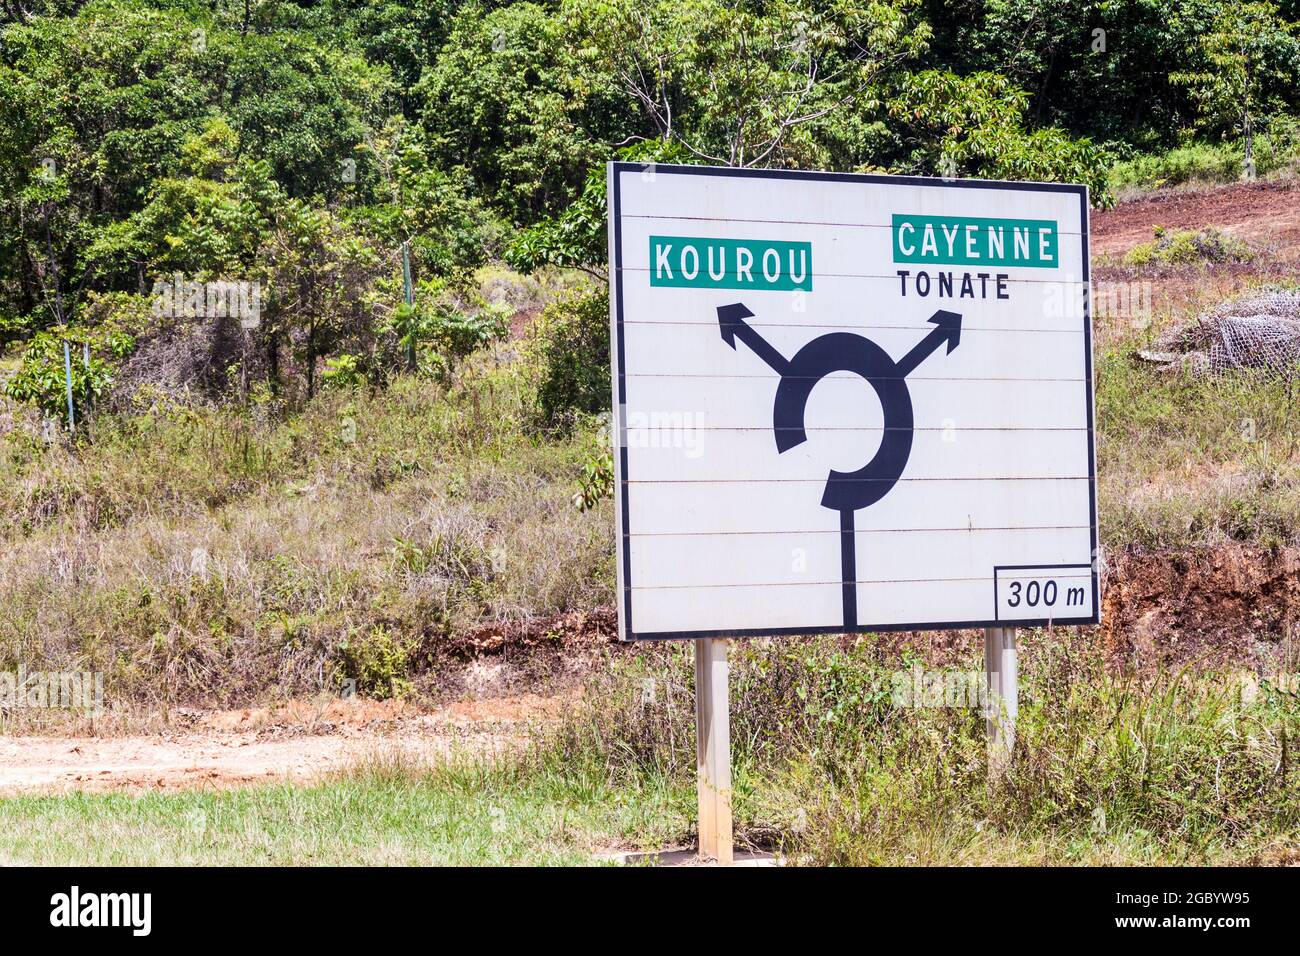 Roadsign at a roundabout pointing to Cayenne and Kourou, French Guiana Stock Photo